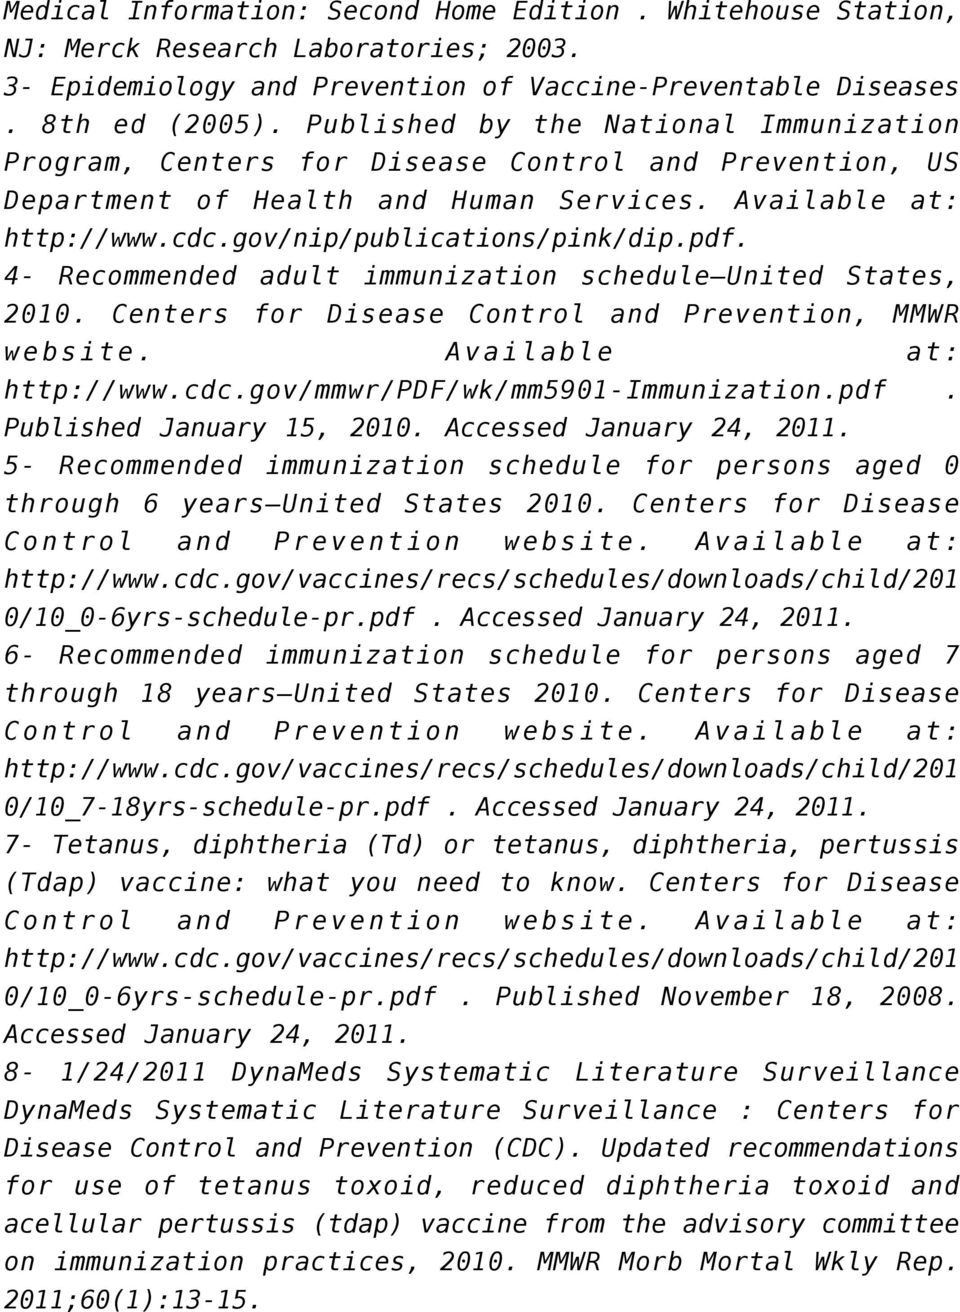 4- Recommended adult immunization schedule United States, 2010. Centers for Disease Control and Prevention, MMWR website. Available at: http://www.cdc.gov/mmwr/pdf/wk/mm5901-immunization.pdf. Published January 15, 2010.